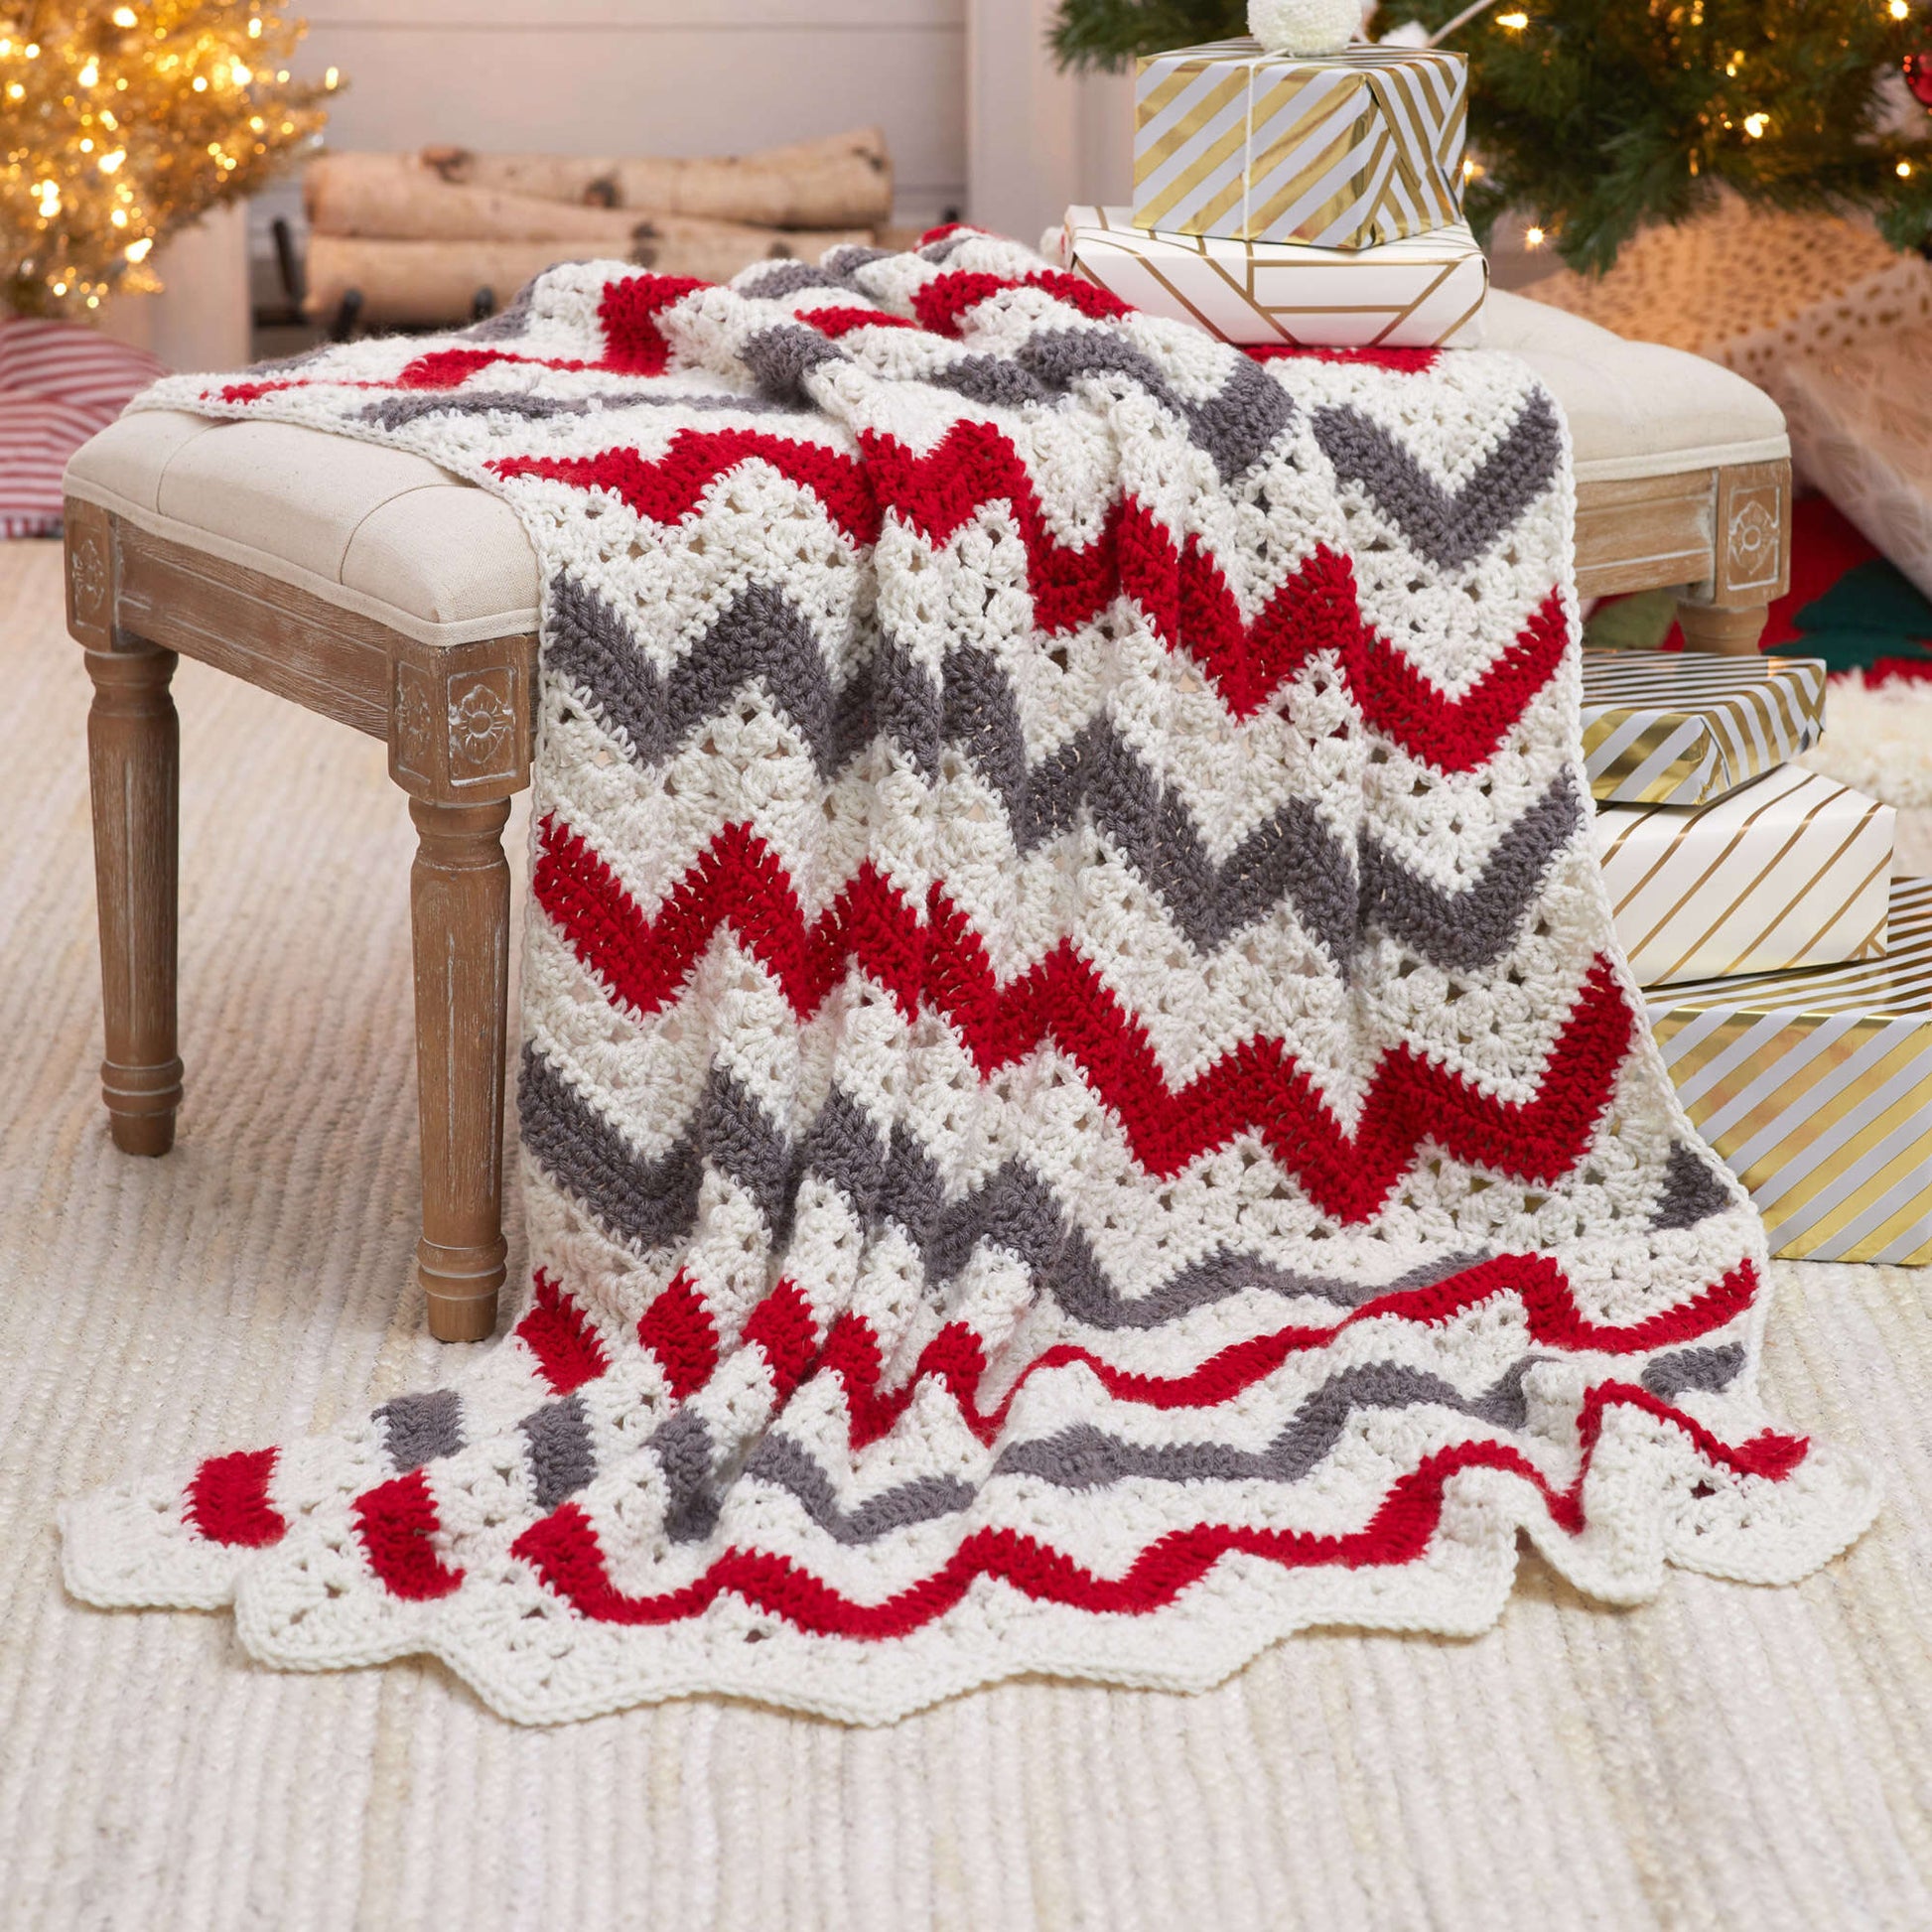 Free Red Heart Crochet Holiday Ripple Throw ( designer dispute, pattern taken down as per ally's note ) Pattern